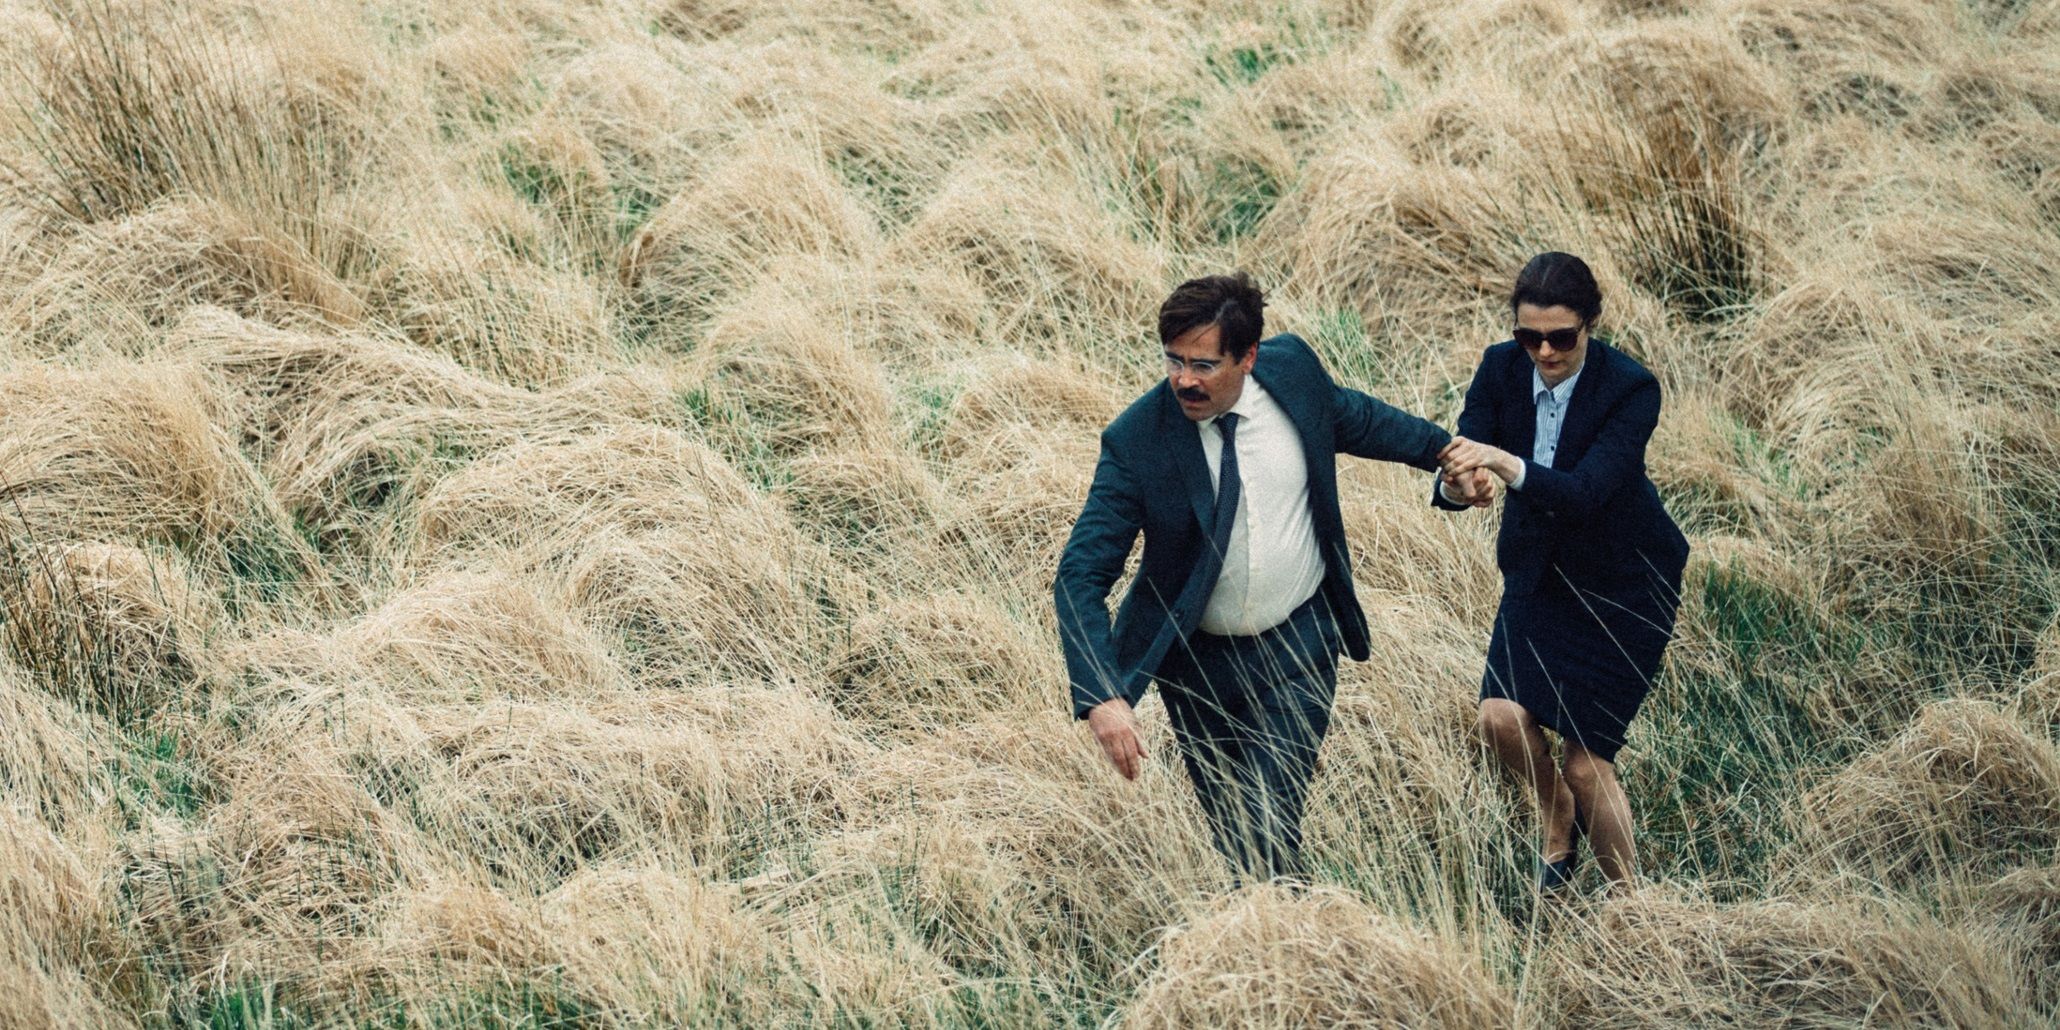 Colin Farrell and Rachel Weisz in The Lobster